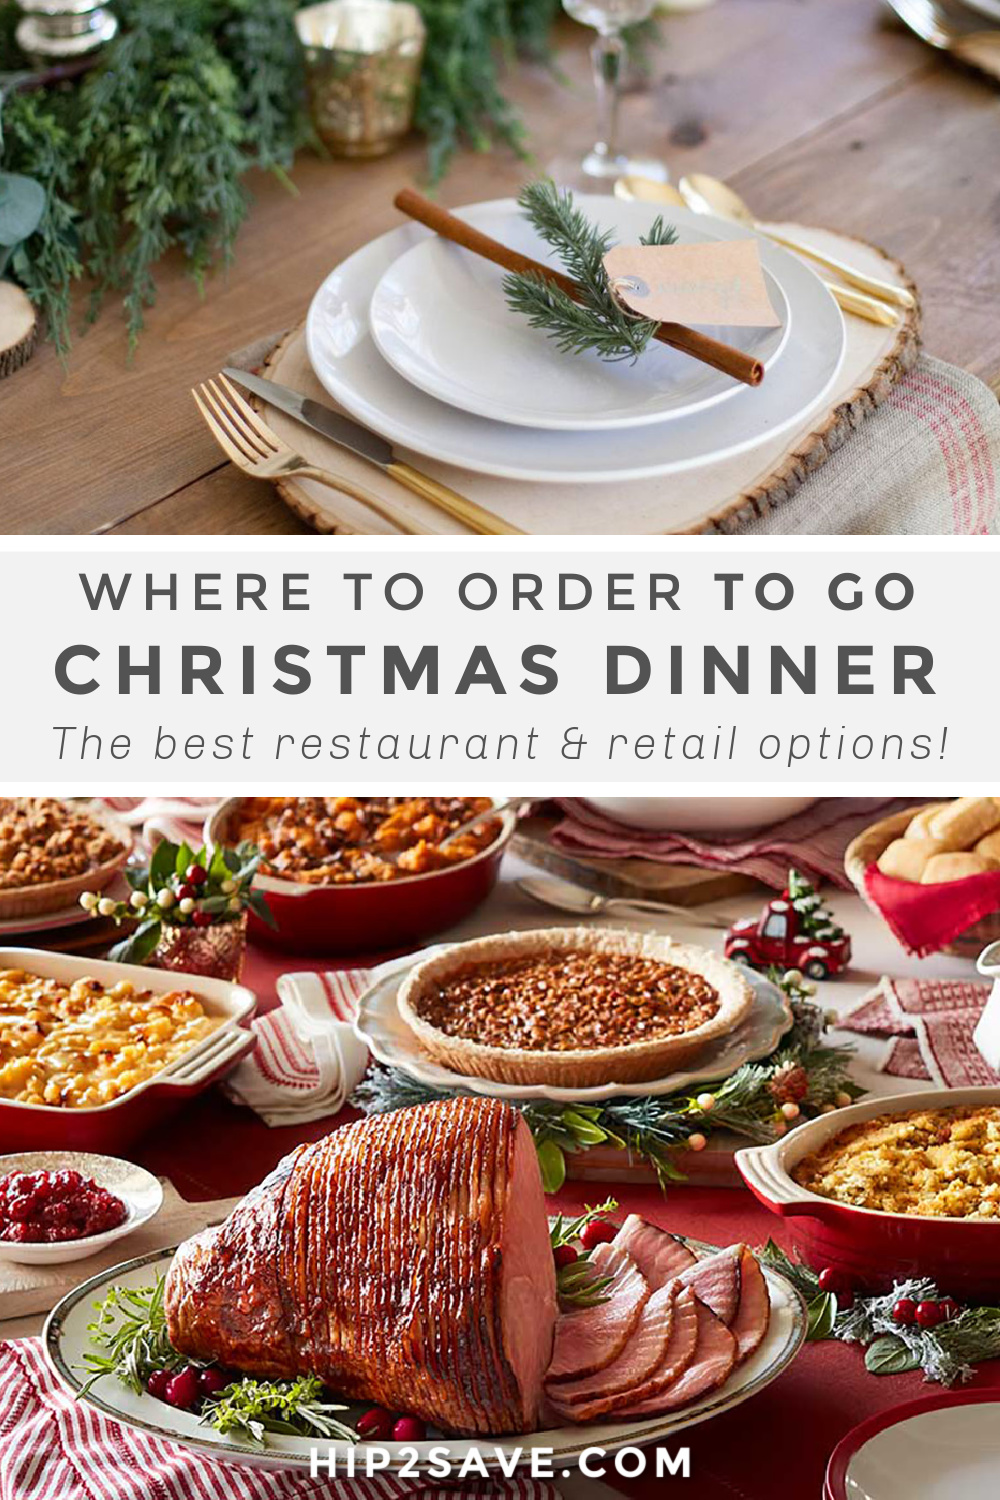 Get Christmas Day Dinner To Go From These Restaurants Hip2save